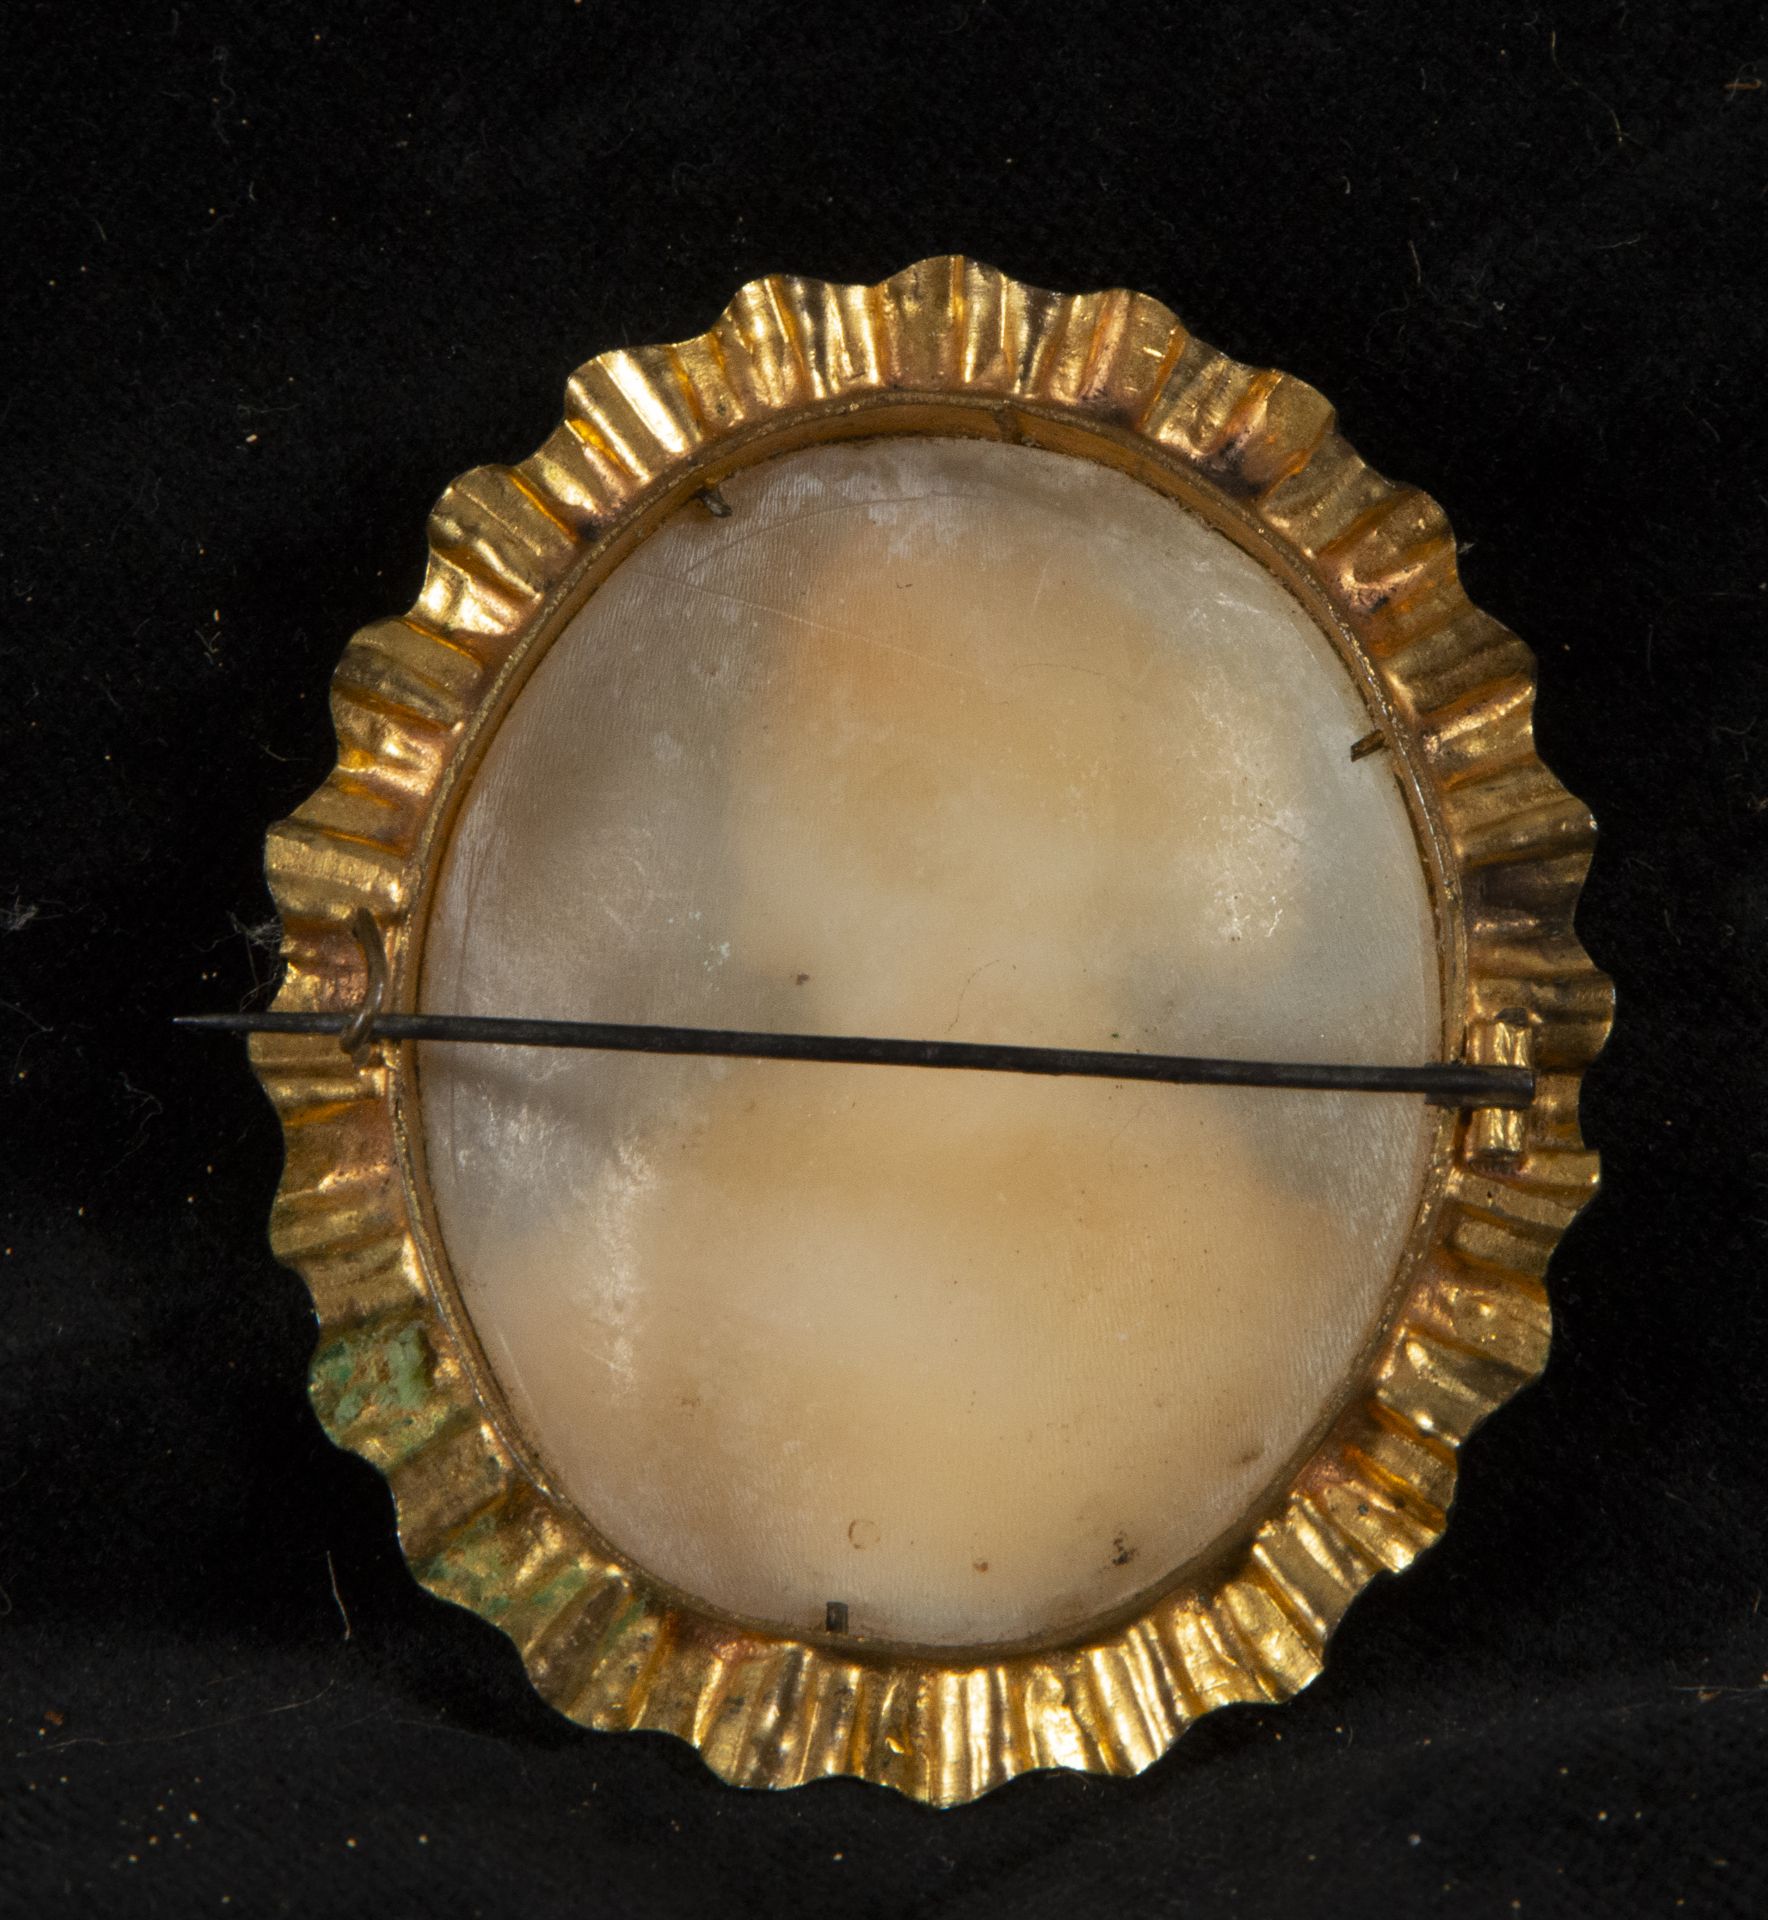 Carved mother-of-pearl shell cameo pendant, 19th century - Image 2 of 2